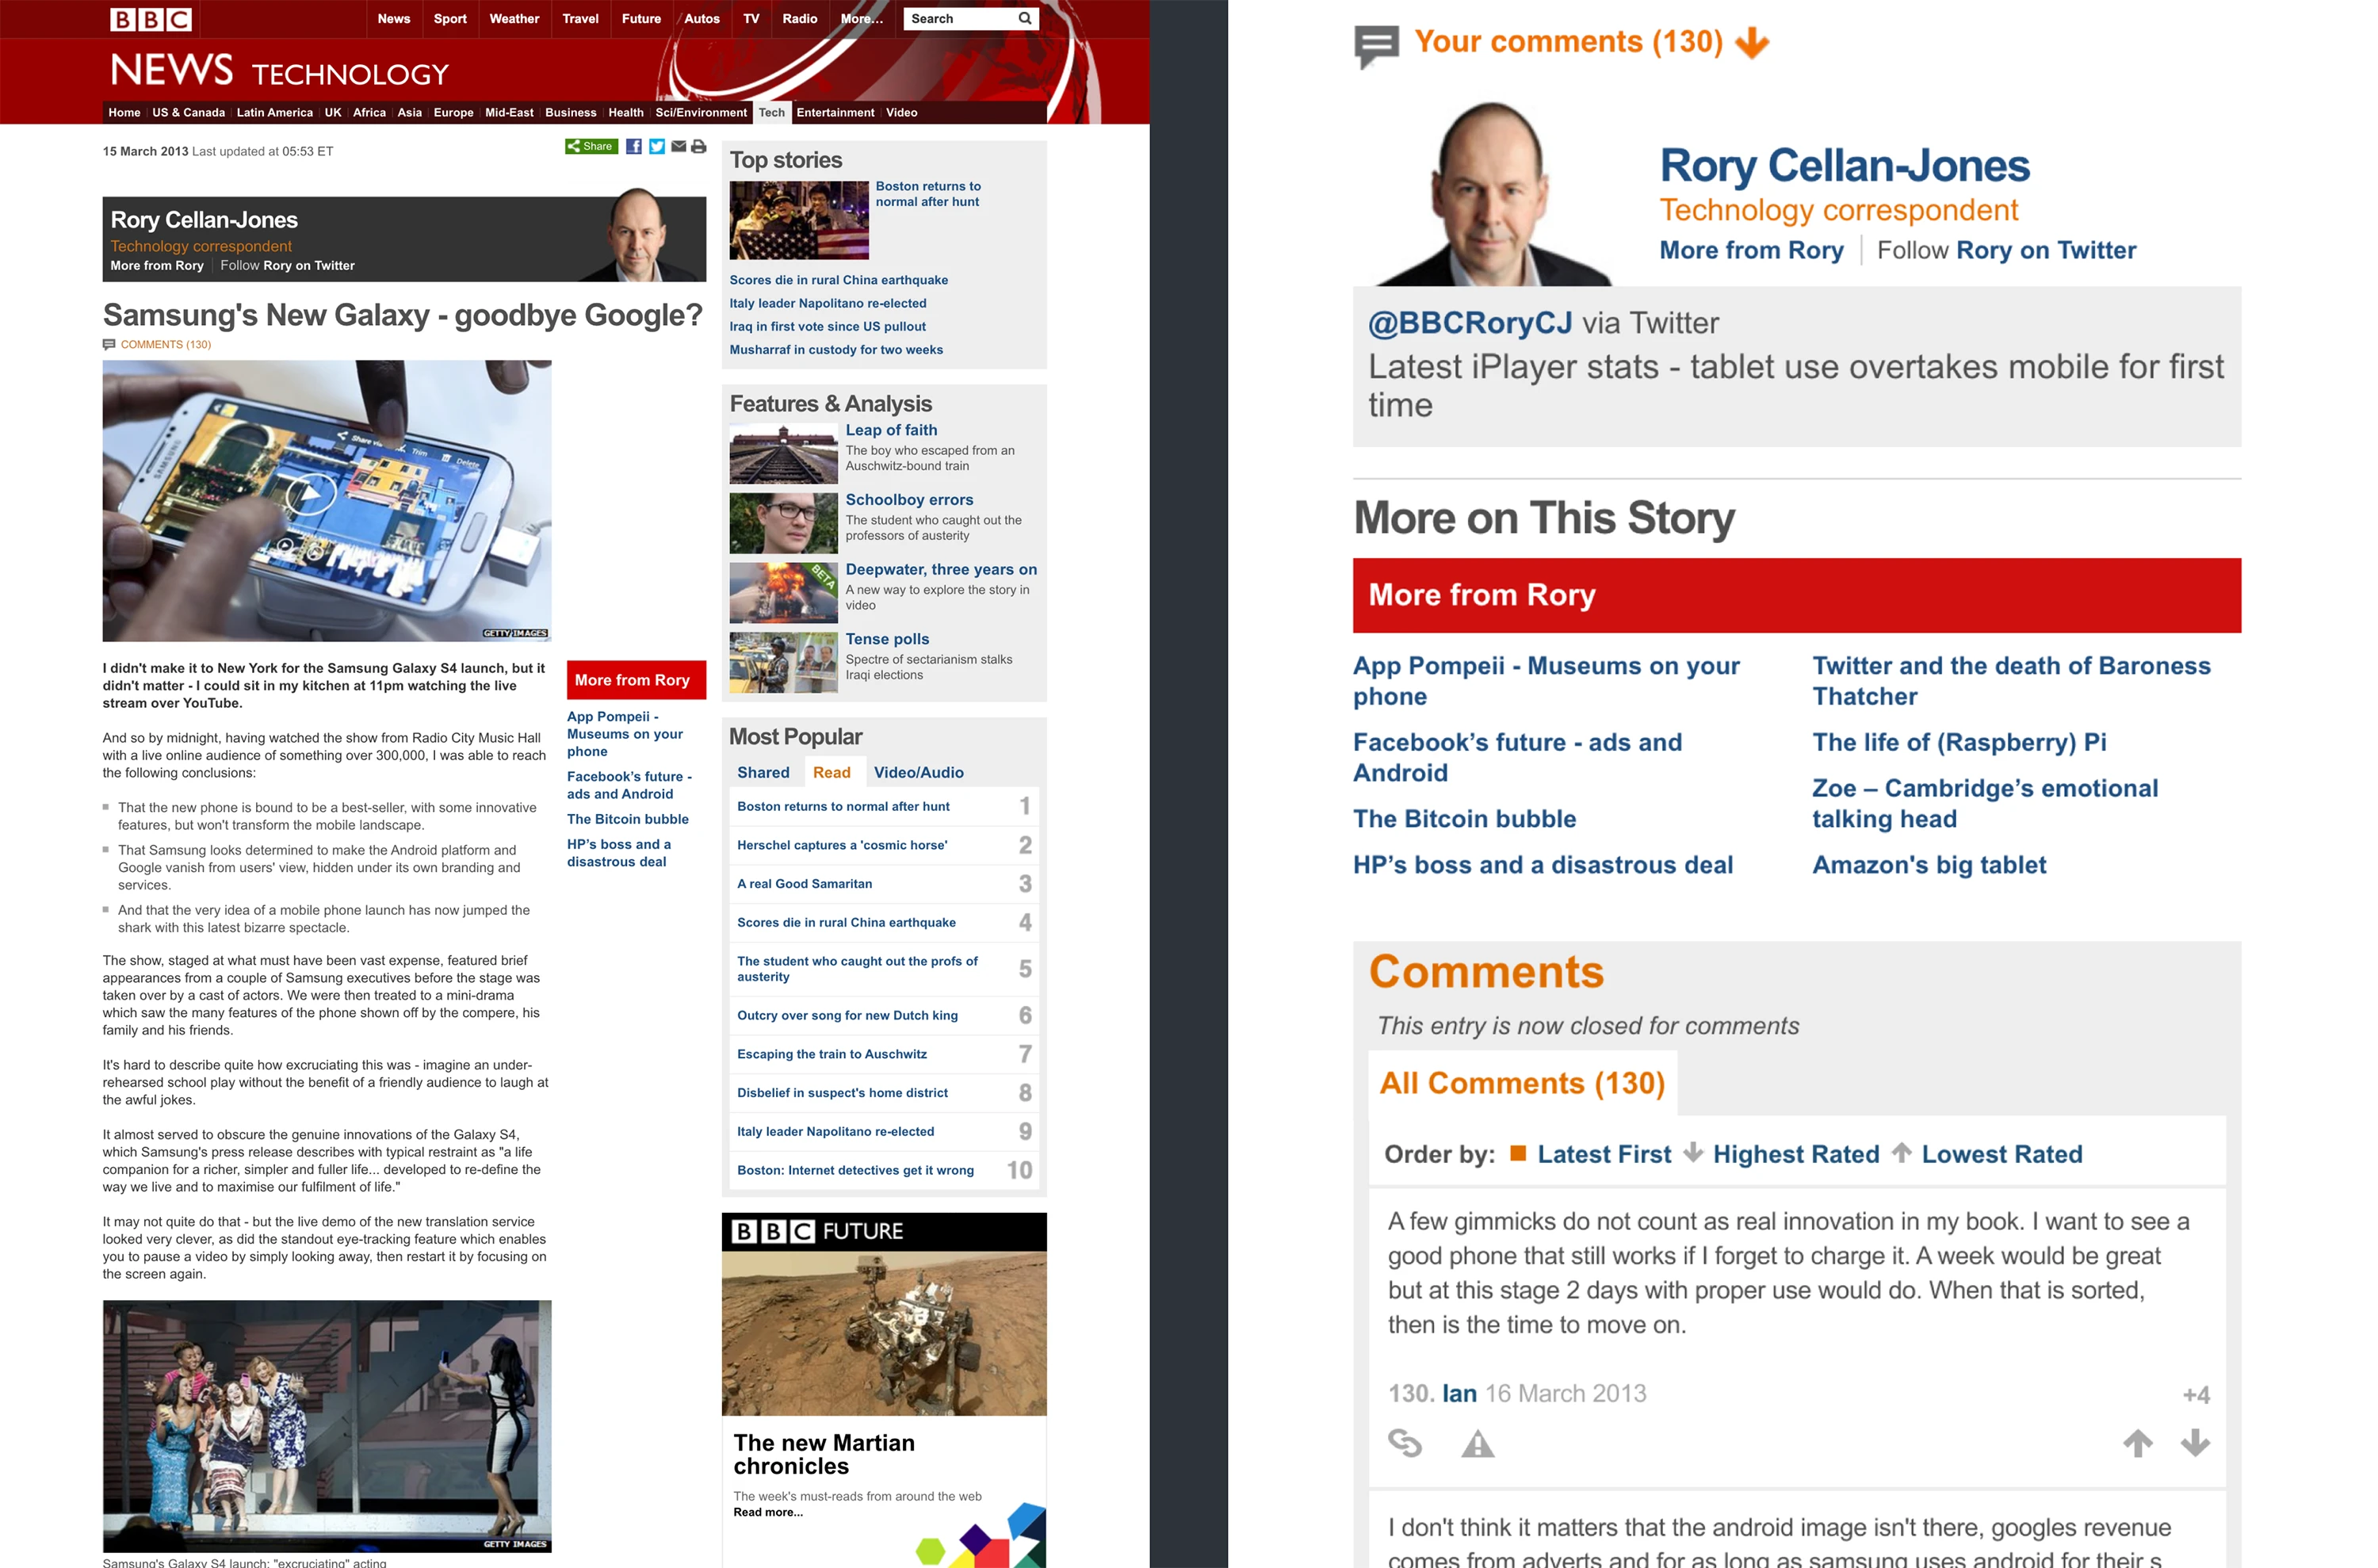 Screenshot of the BBC News website showing the Comments module in context